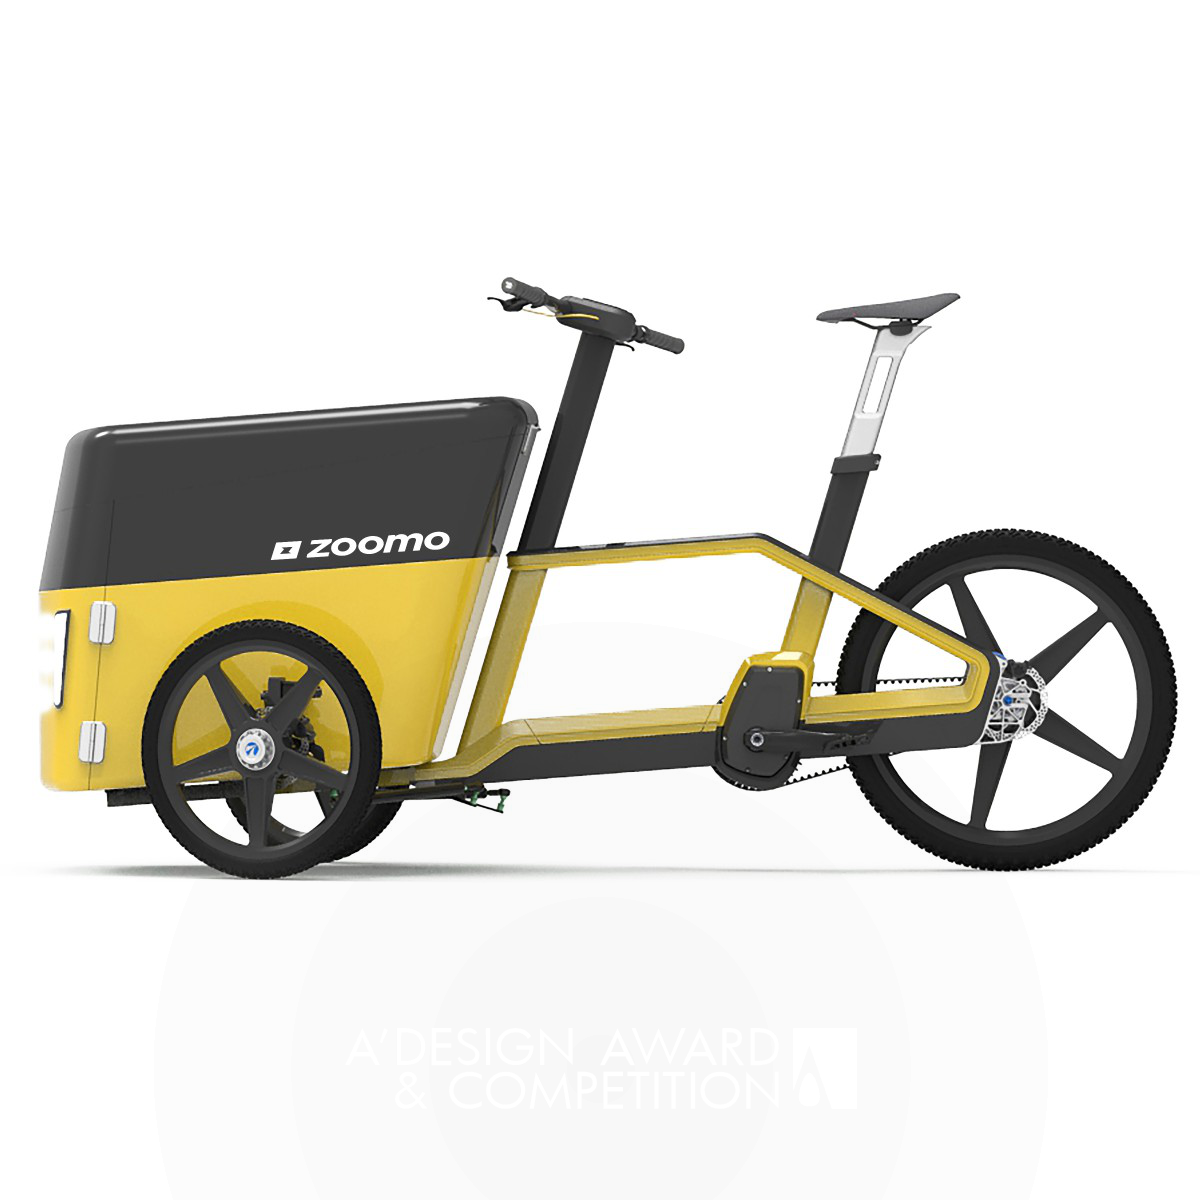 Asbjoerk Stanly Mogensen wins Silver at the prestigious A' Vehicle, Mobility and Transportation Design Award with Zoomo Cargo Ebike.